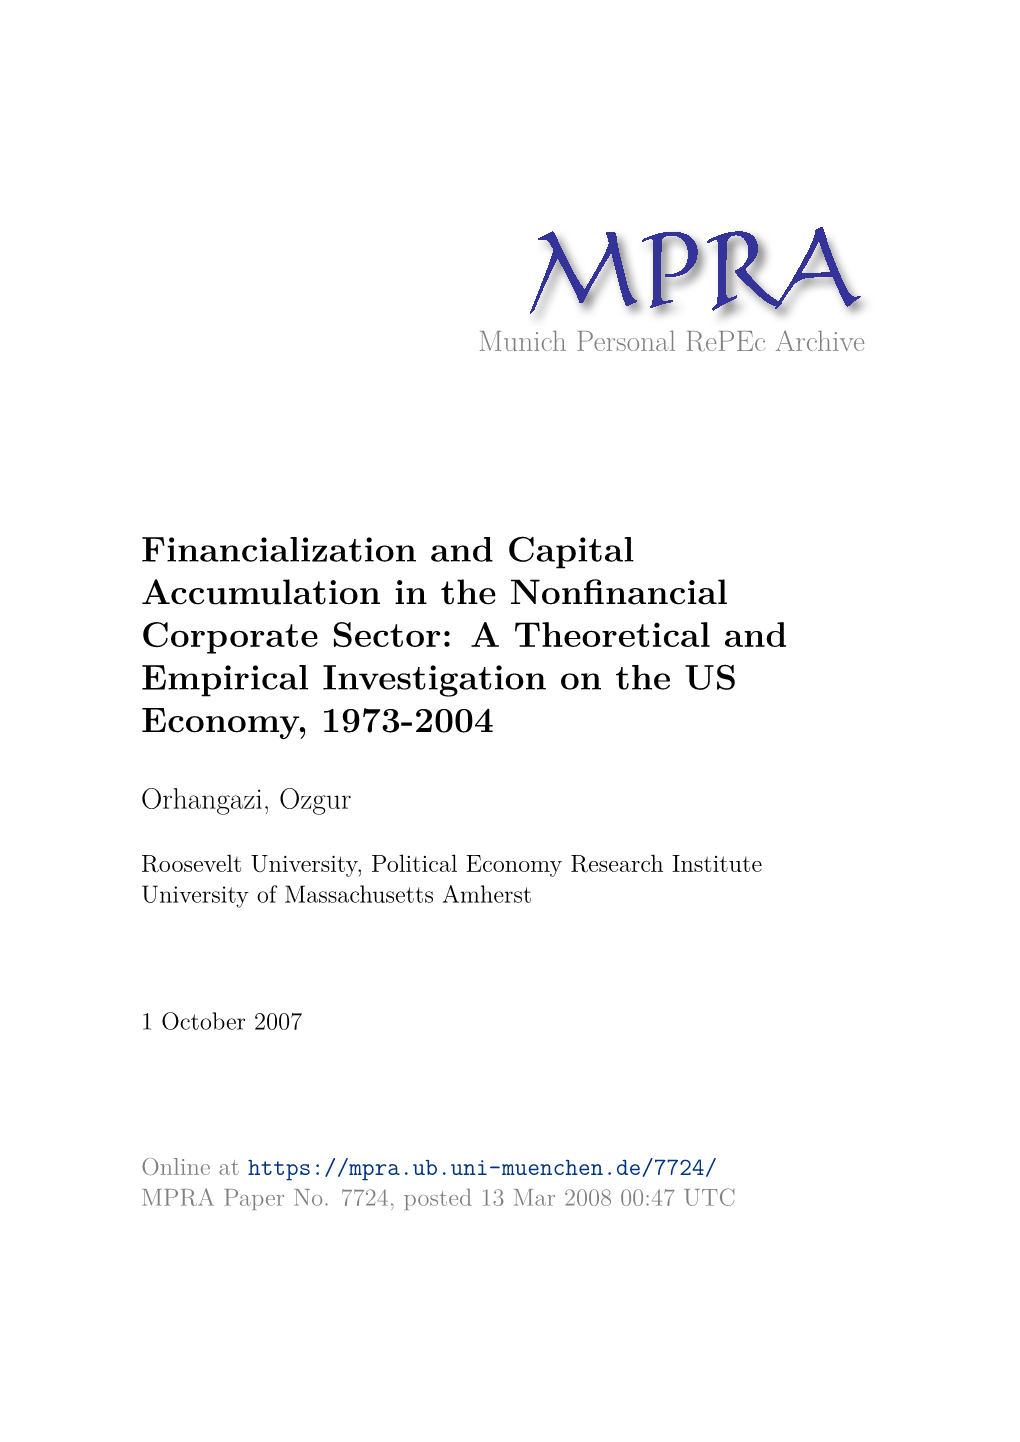 Financialization and Capital Accumulation in the Nonfinancial